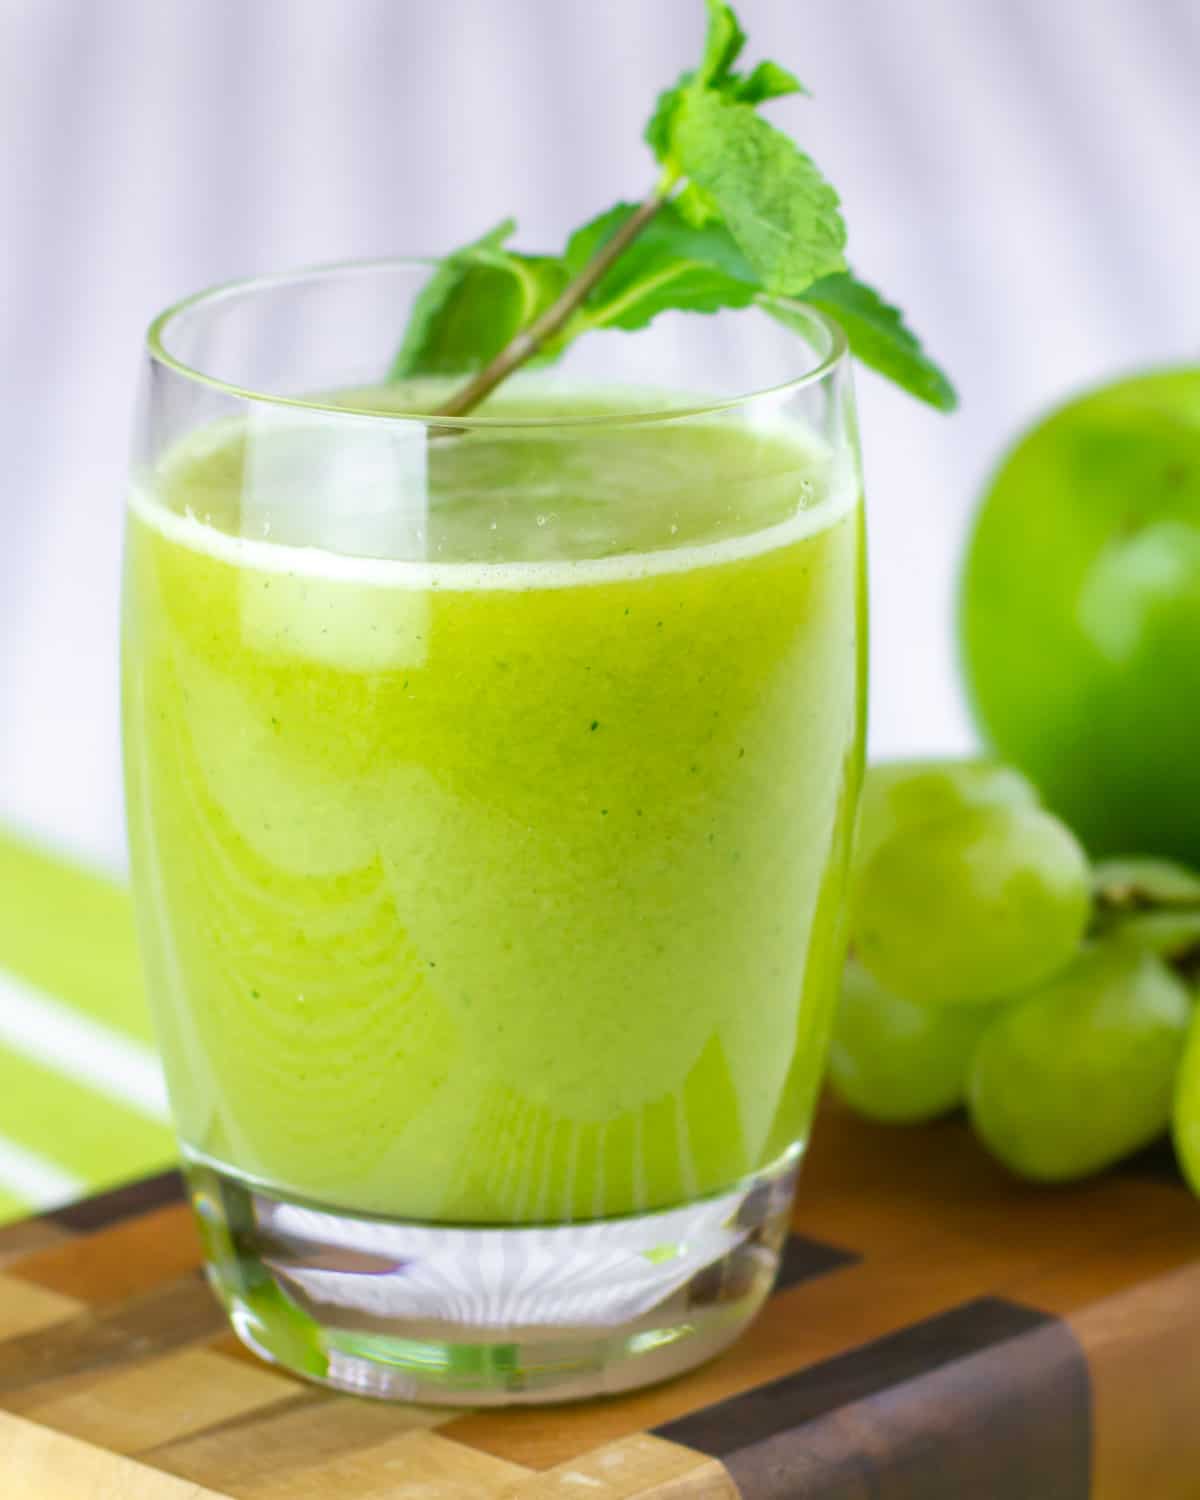 A close up picture of a glass of juice with a sprig fresh mint stuck in the juice.